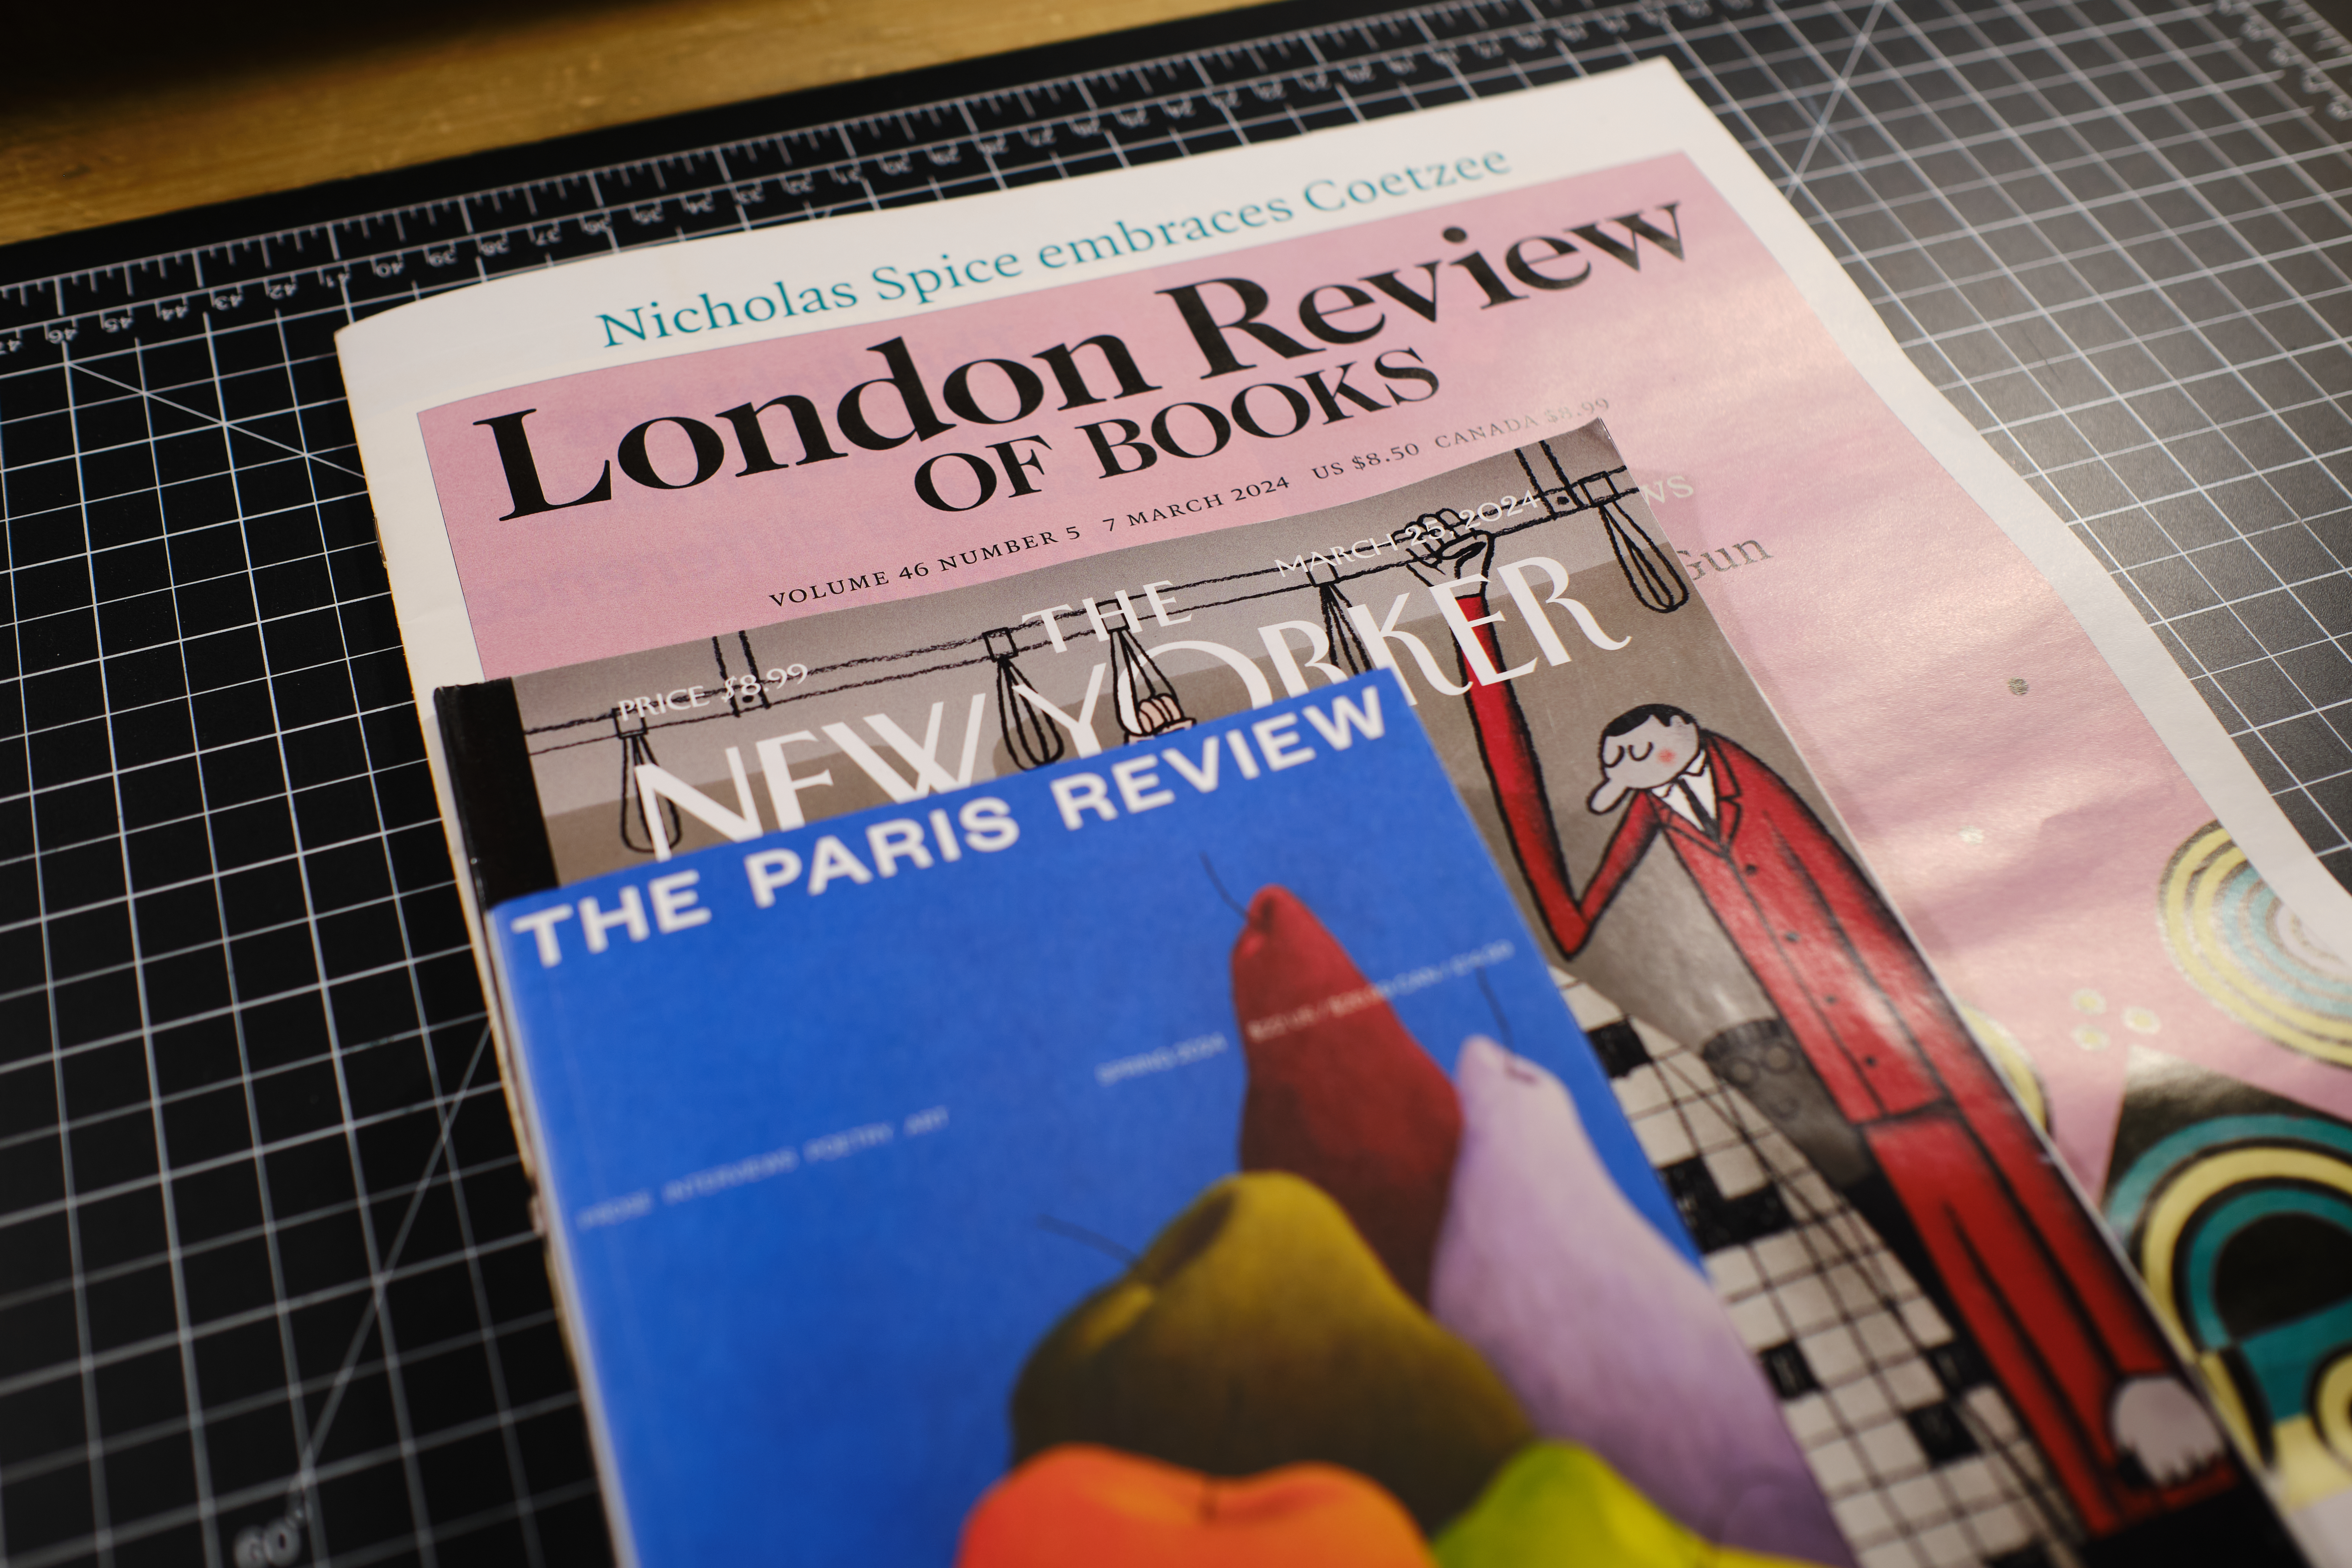 The London of Review of Books, The New Yorker, and the Paris Review stacked atop each other on a desk